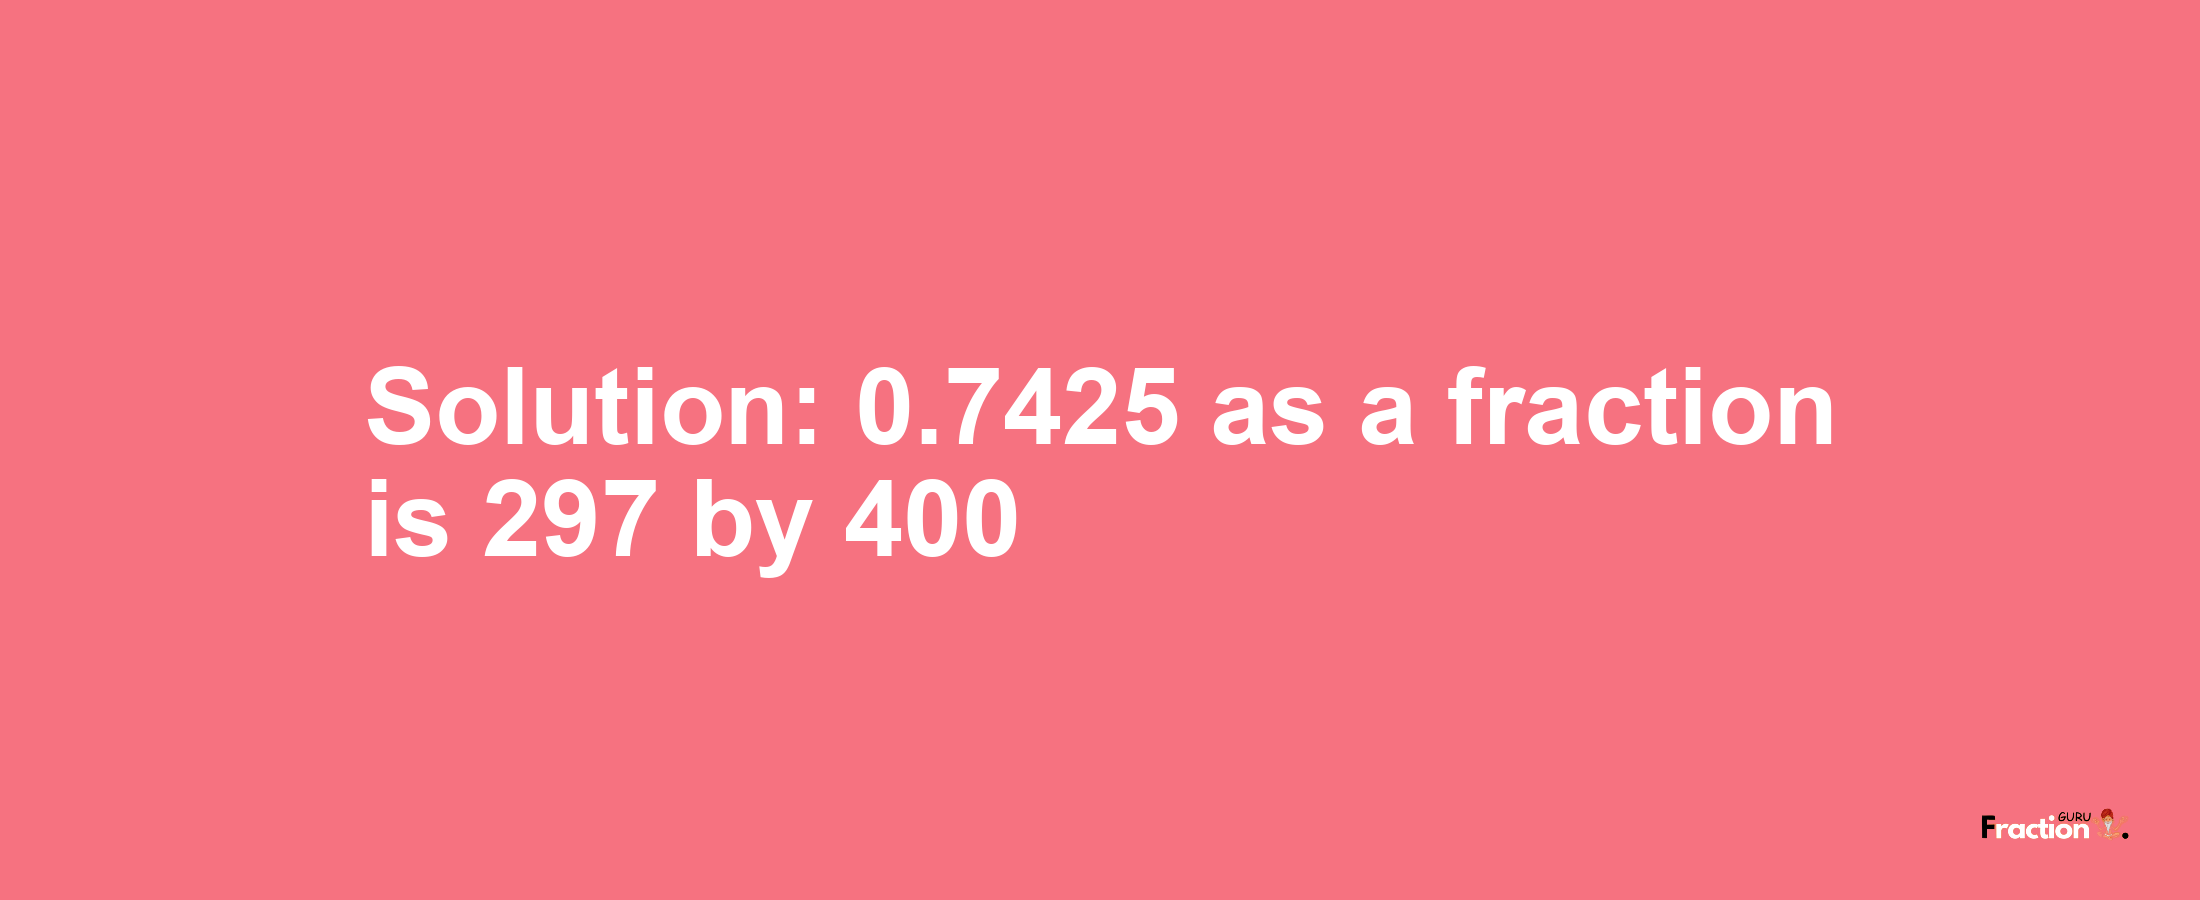 Solution:0.7425 as a fraction is 297/400